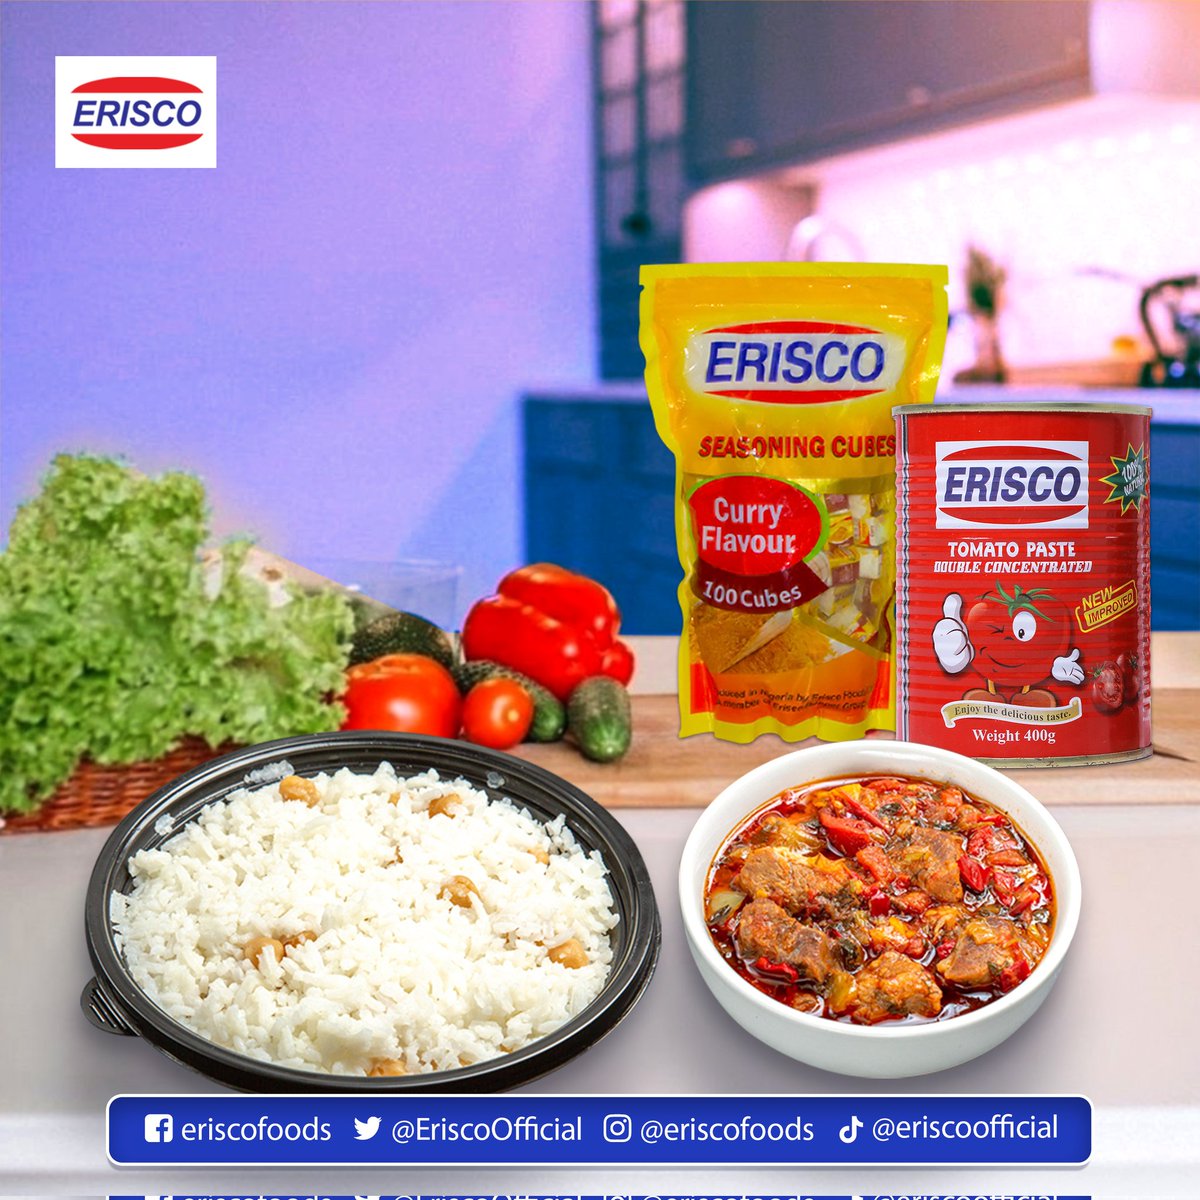 Craving rice with stew flavoured with Erisco seasoning cubes for dinner. 😋 What's on your menu for dinner?
#EriscoFoods  #dinnertime  #MadeInNigeria.